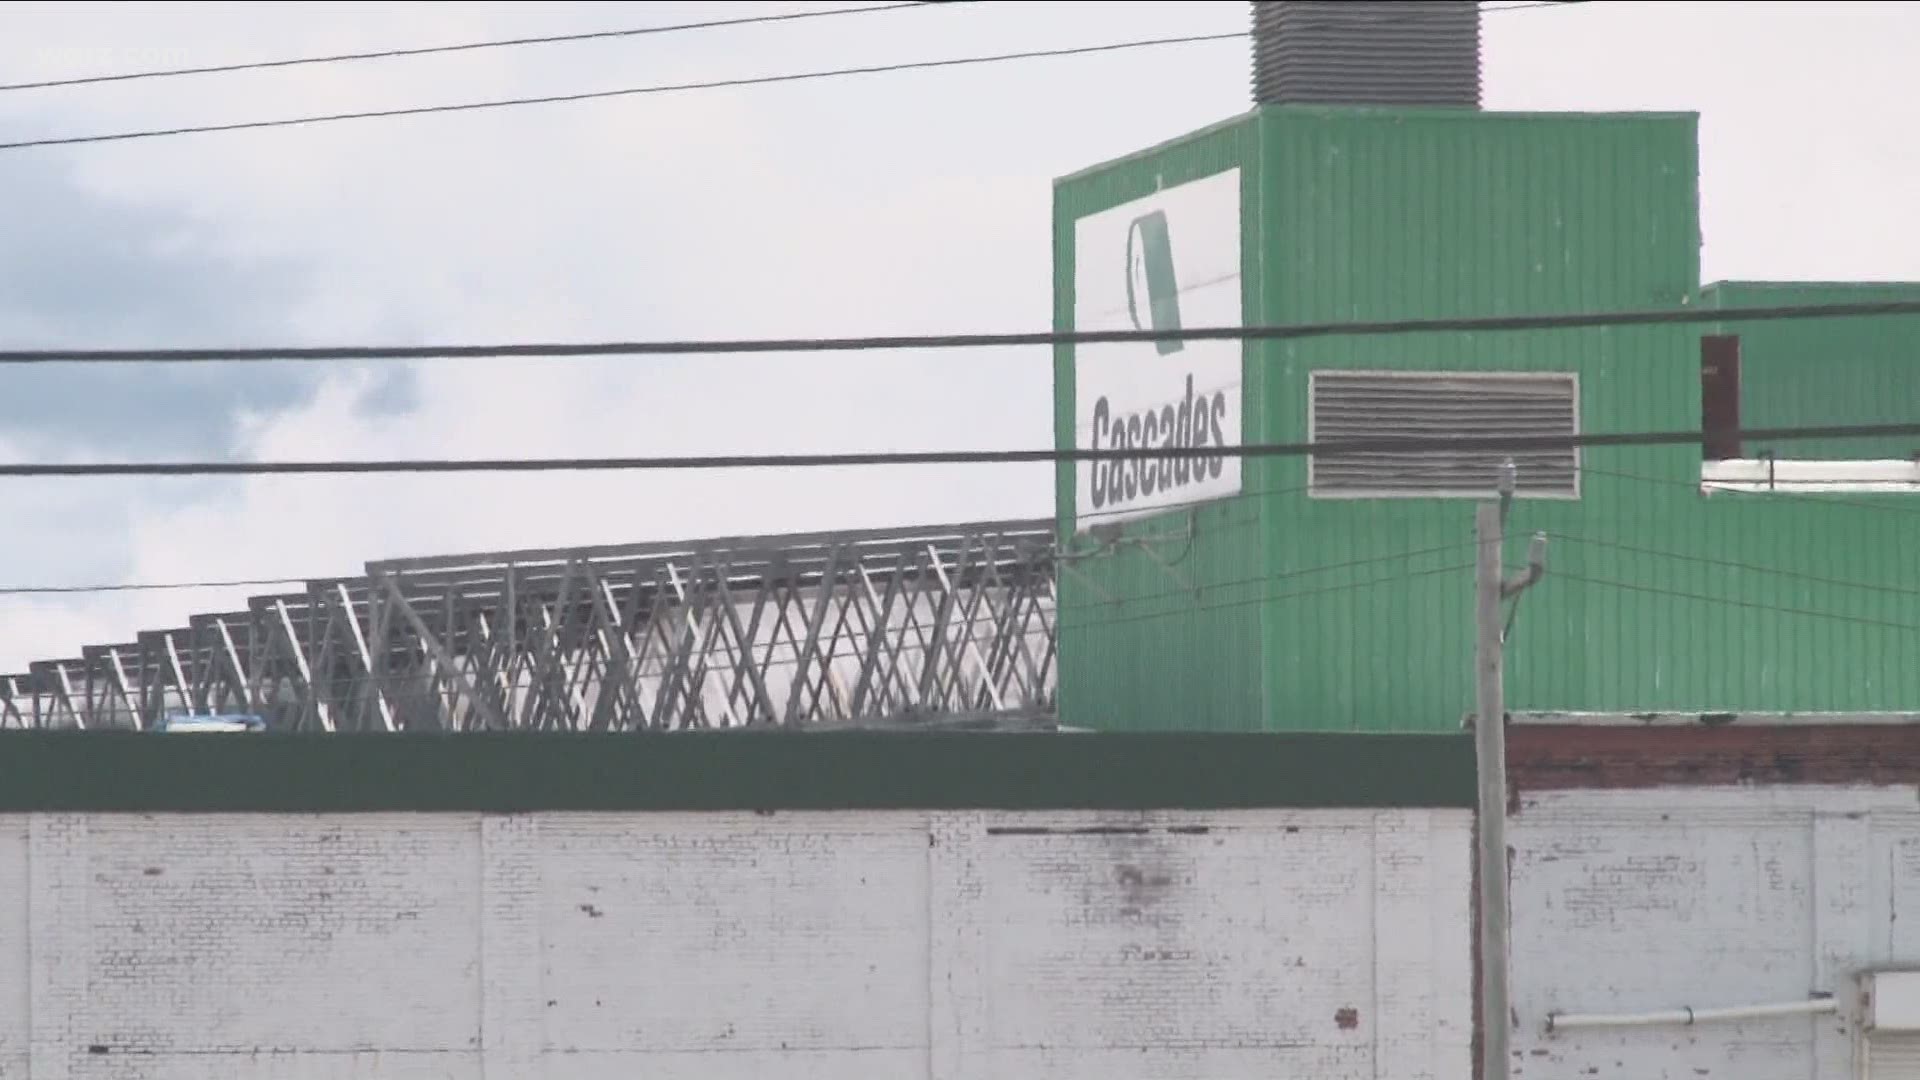 Paper mill says ongoing odor isn't harmful